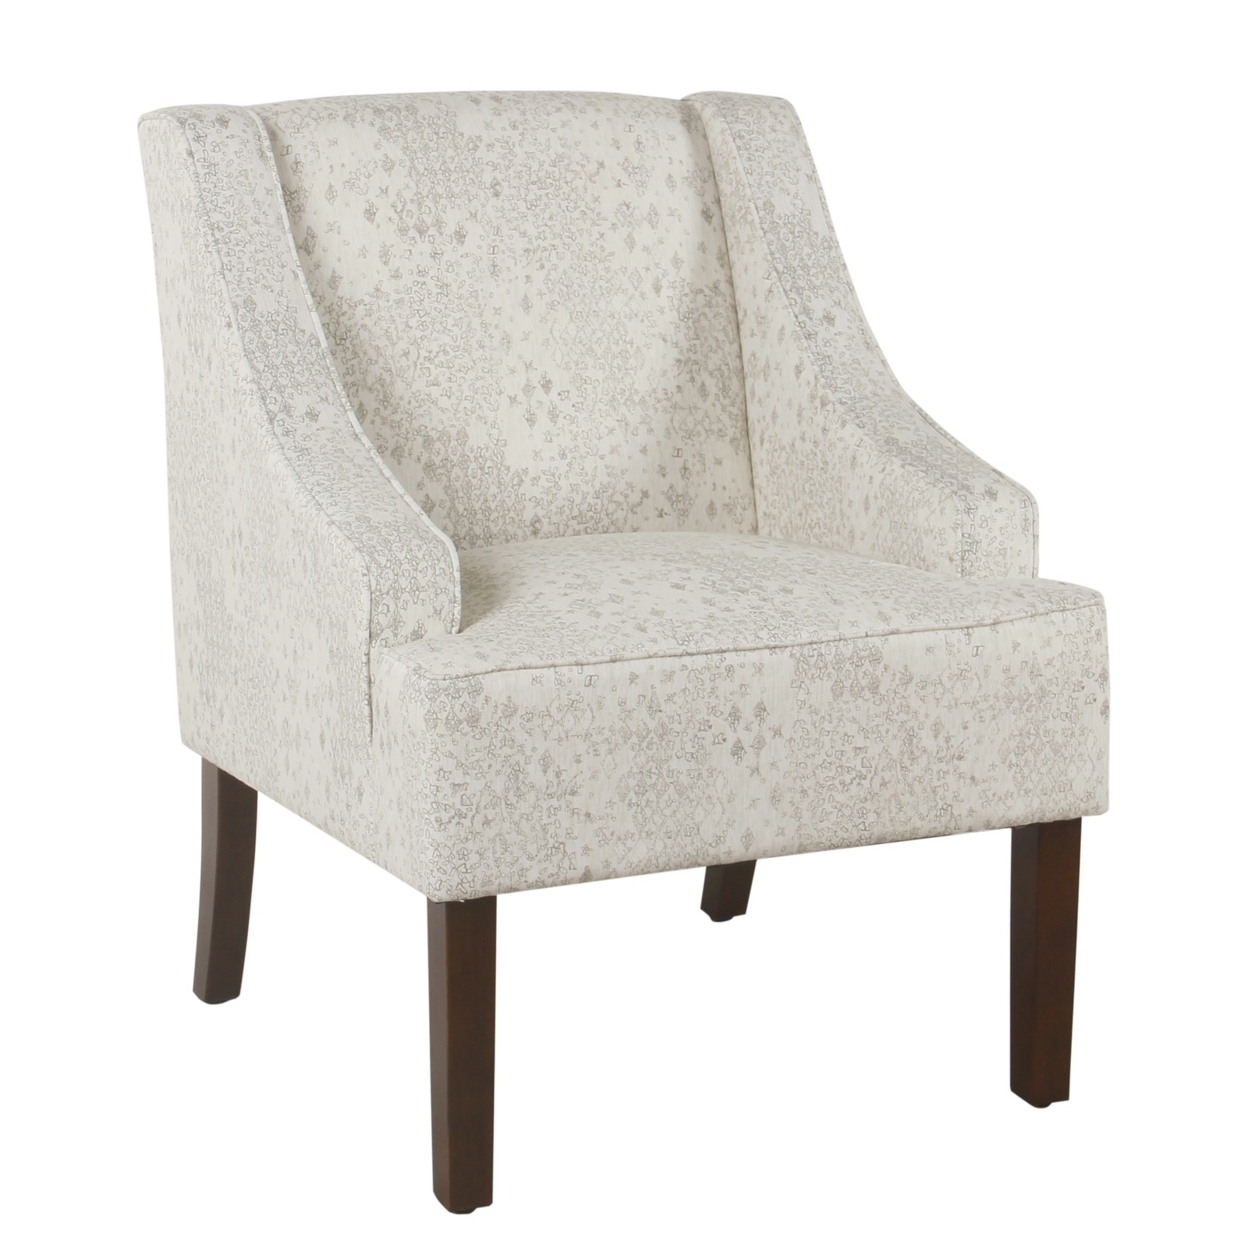 25 Inch Accent Chair, Patterned Gray Fabric Upholstery With Swooping Arms